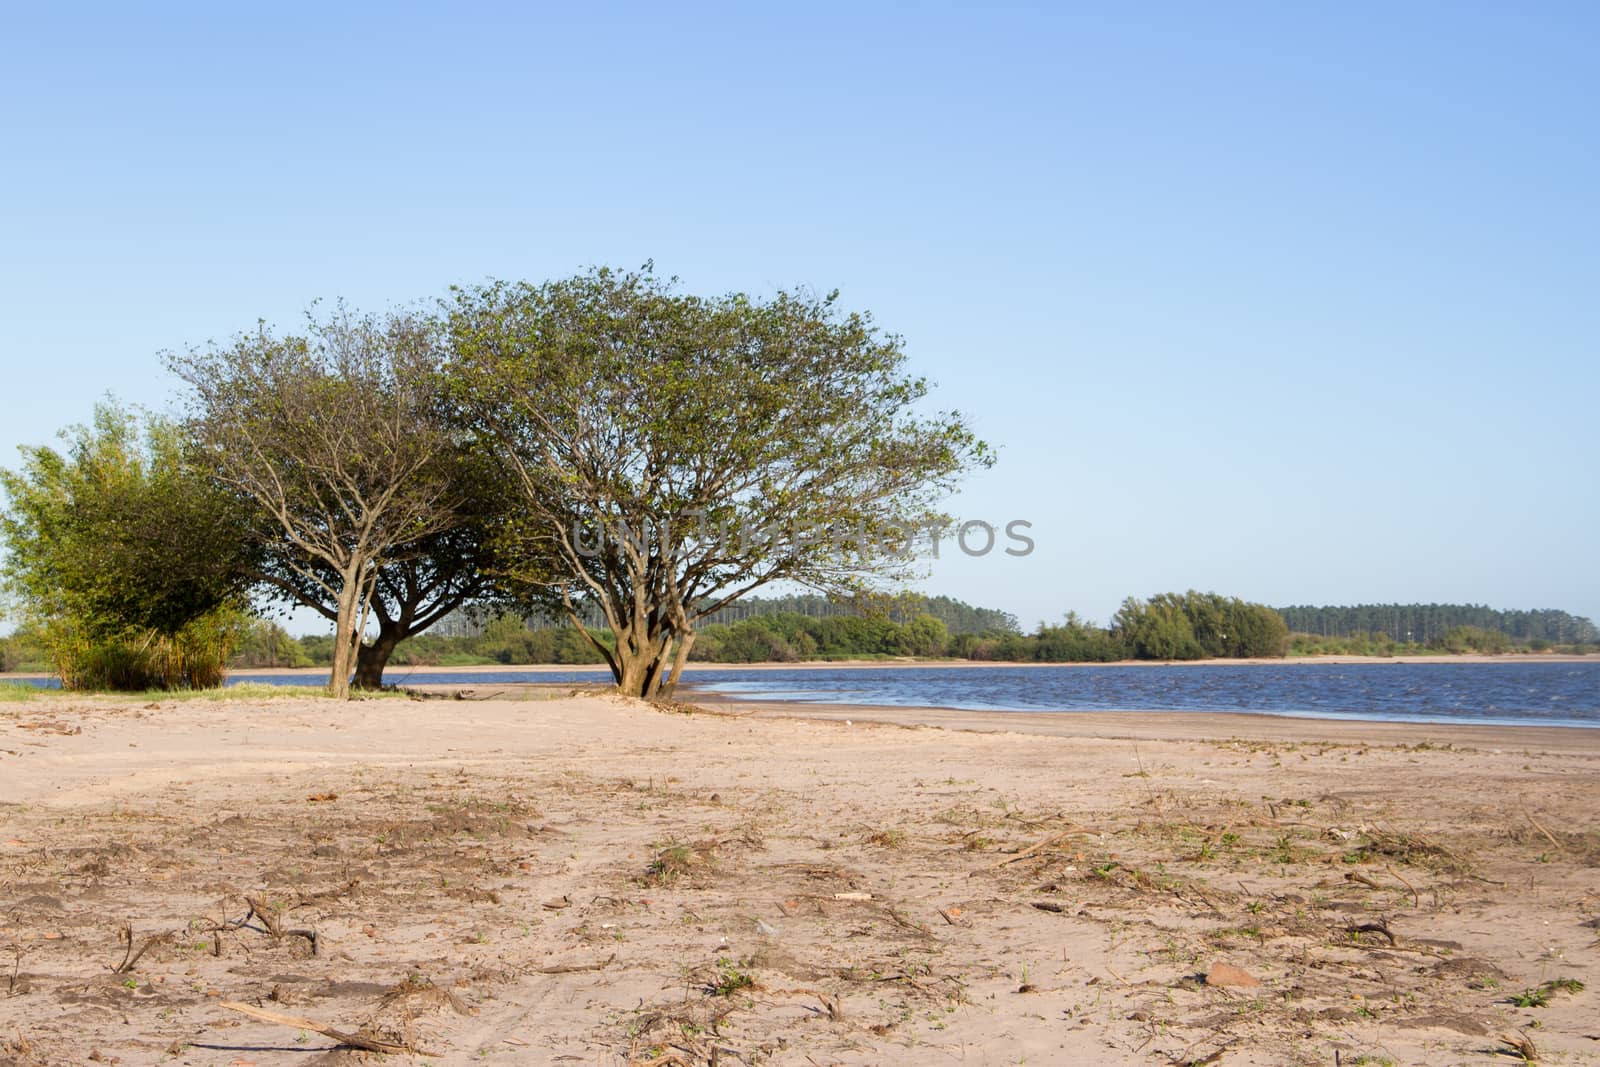 summer landscape on the banks of the river in the city of federation province of entre rios argentina by GabrielaBertolini